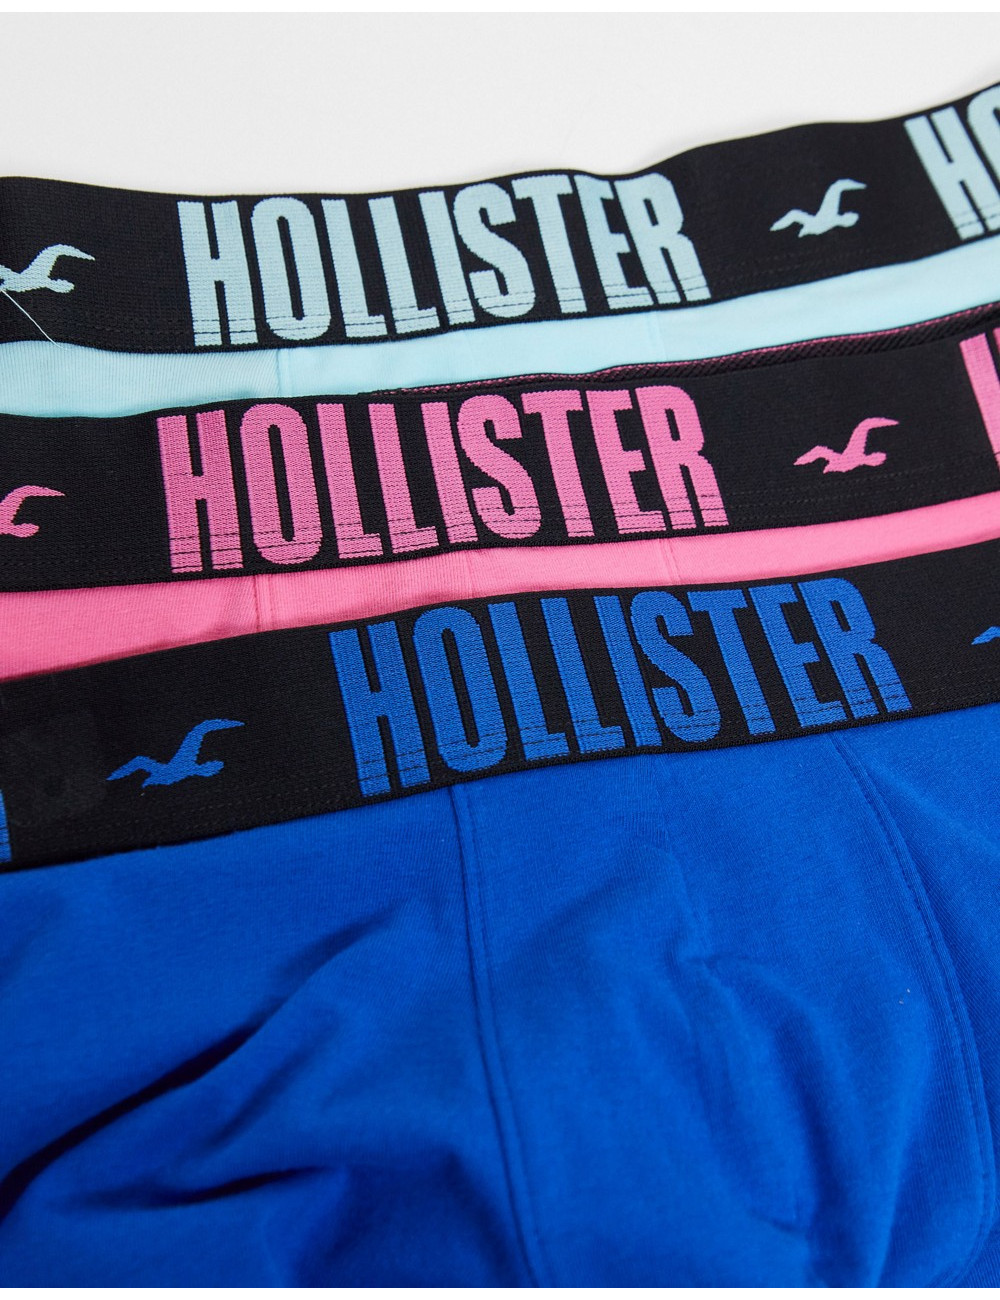 Hollister 3 pack trunk in...